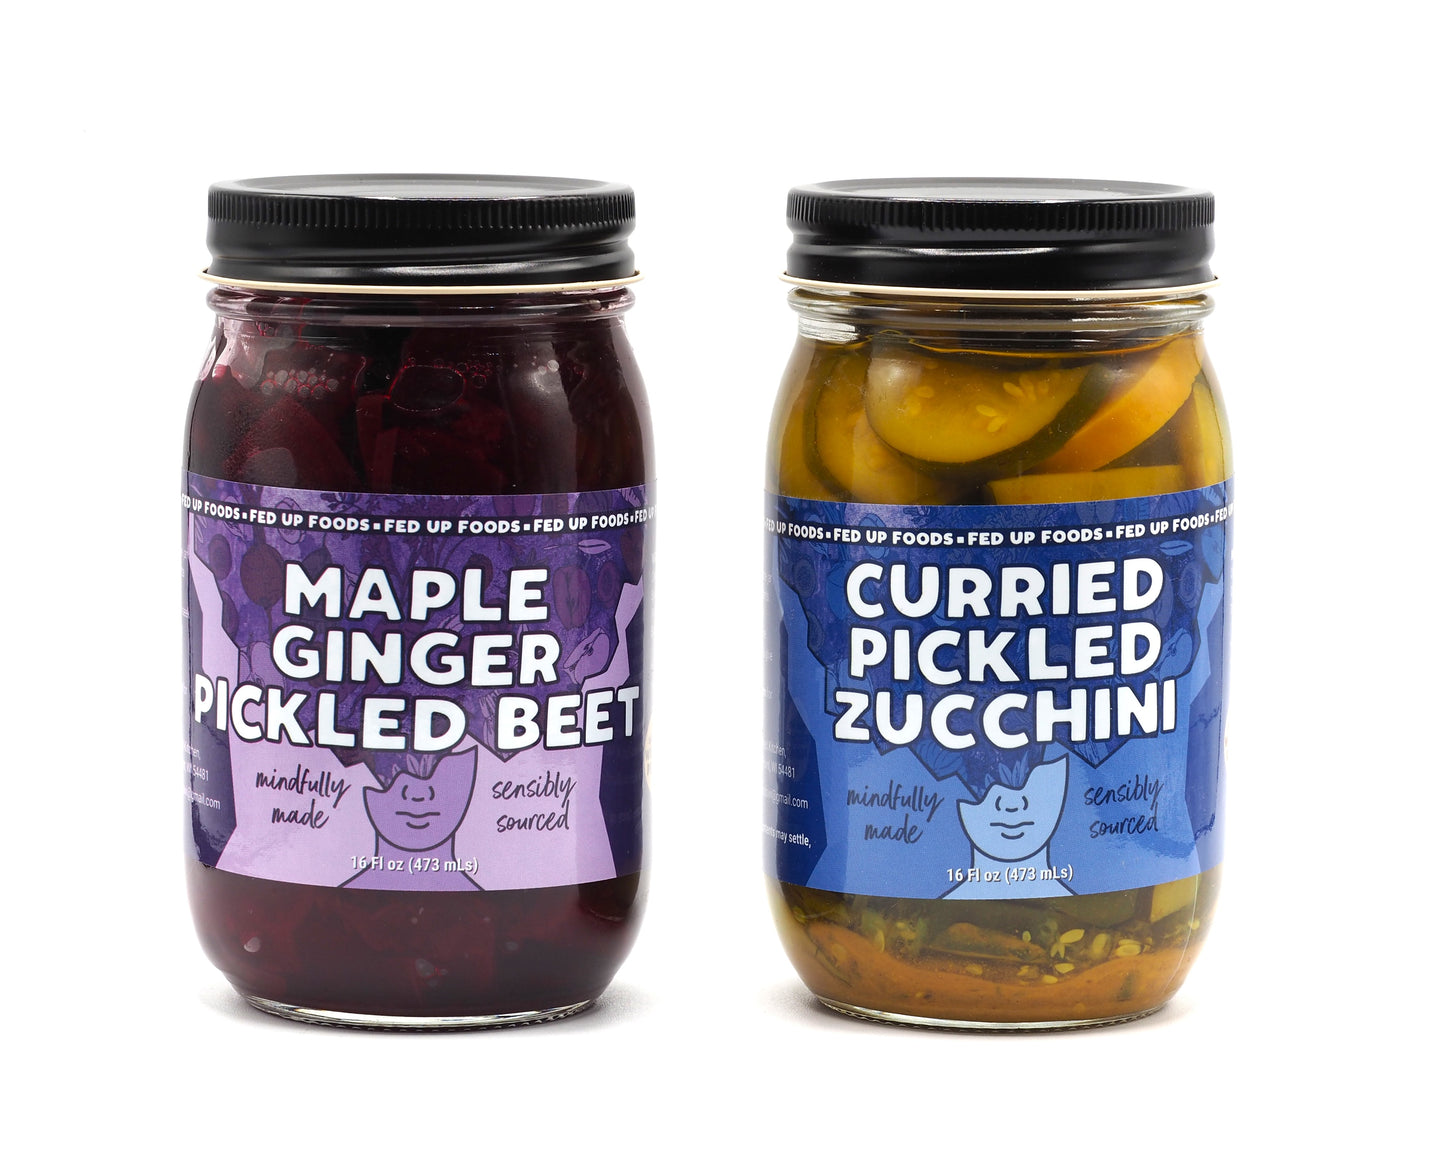 Fed Up Foods Maple Ginger Pickled Beet and Curried Pickled Zucchini in a 2 pack variety pack